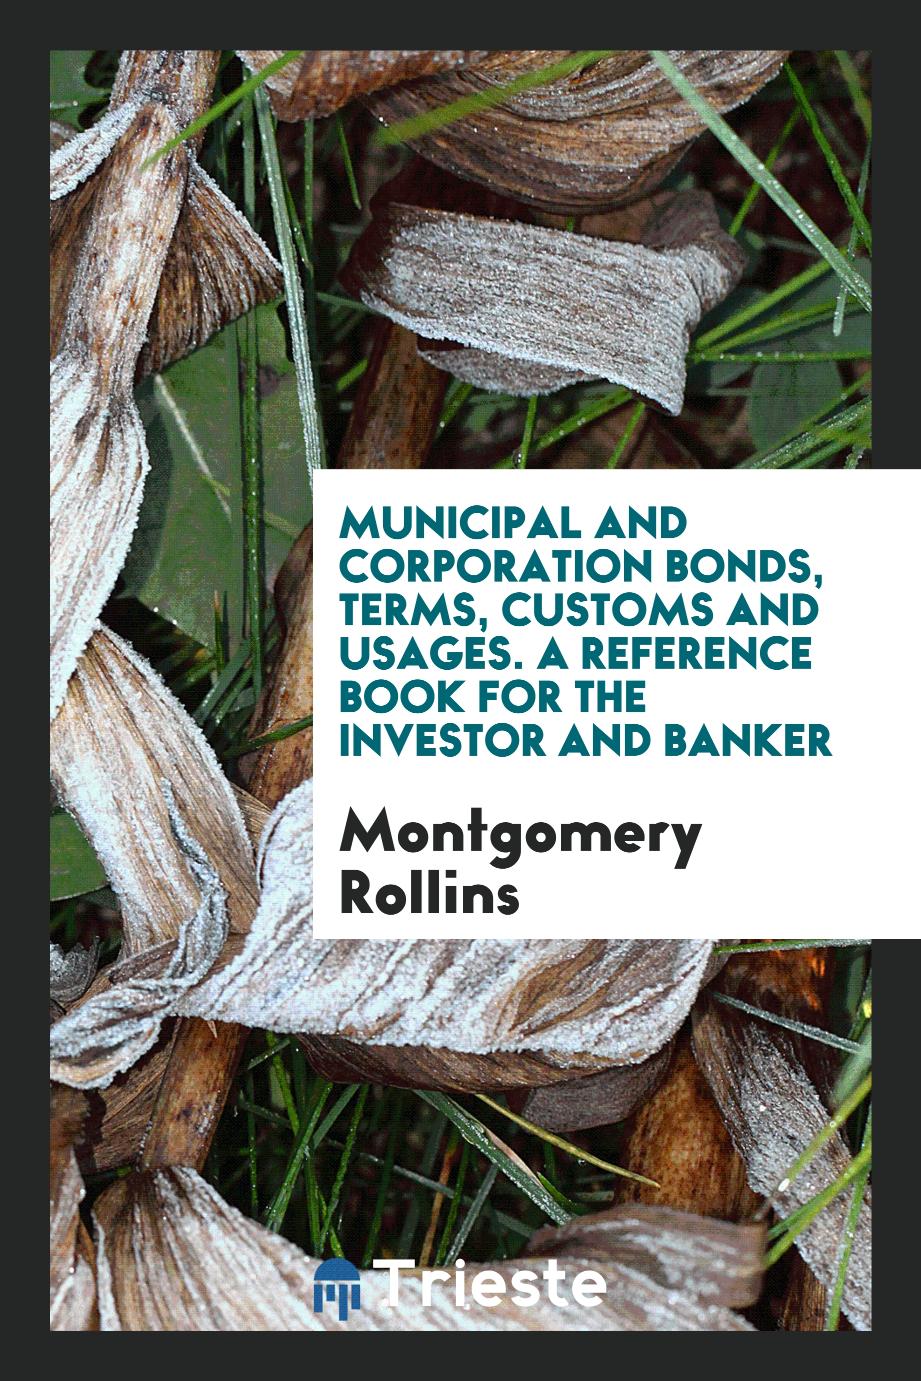 Municipal and Corporation Bonds, Terms, Customs and Usages. A Reference Book for the Investor and Banker